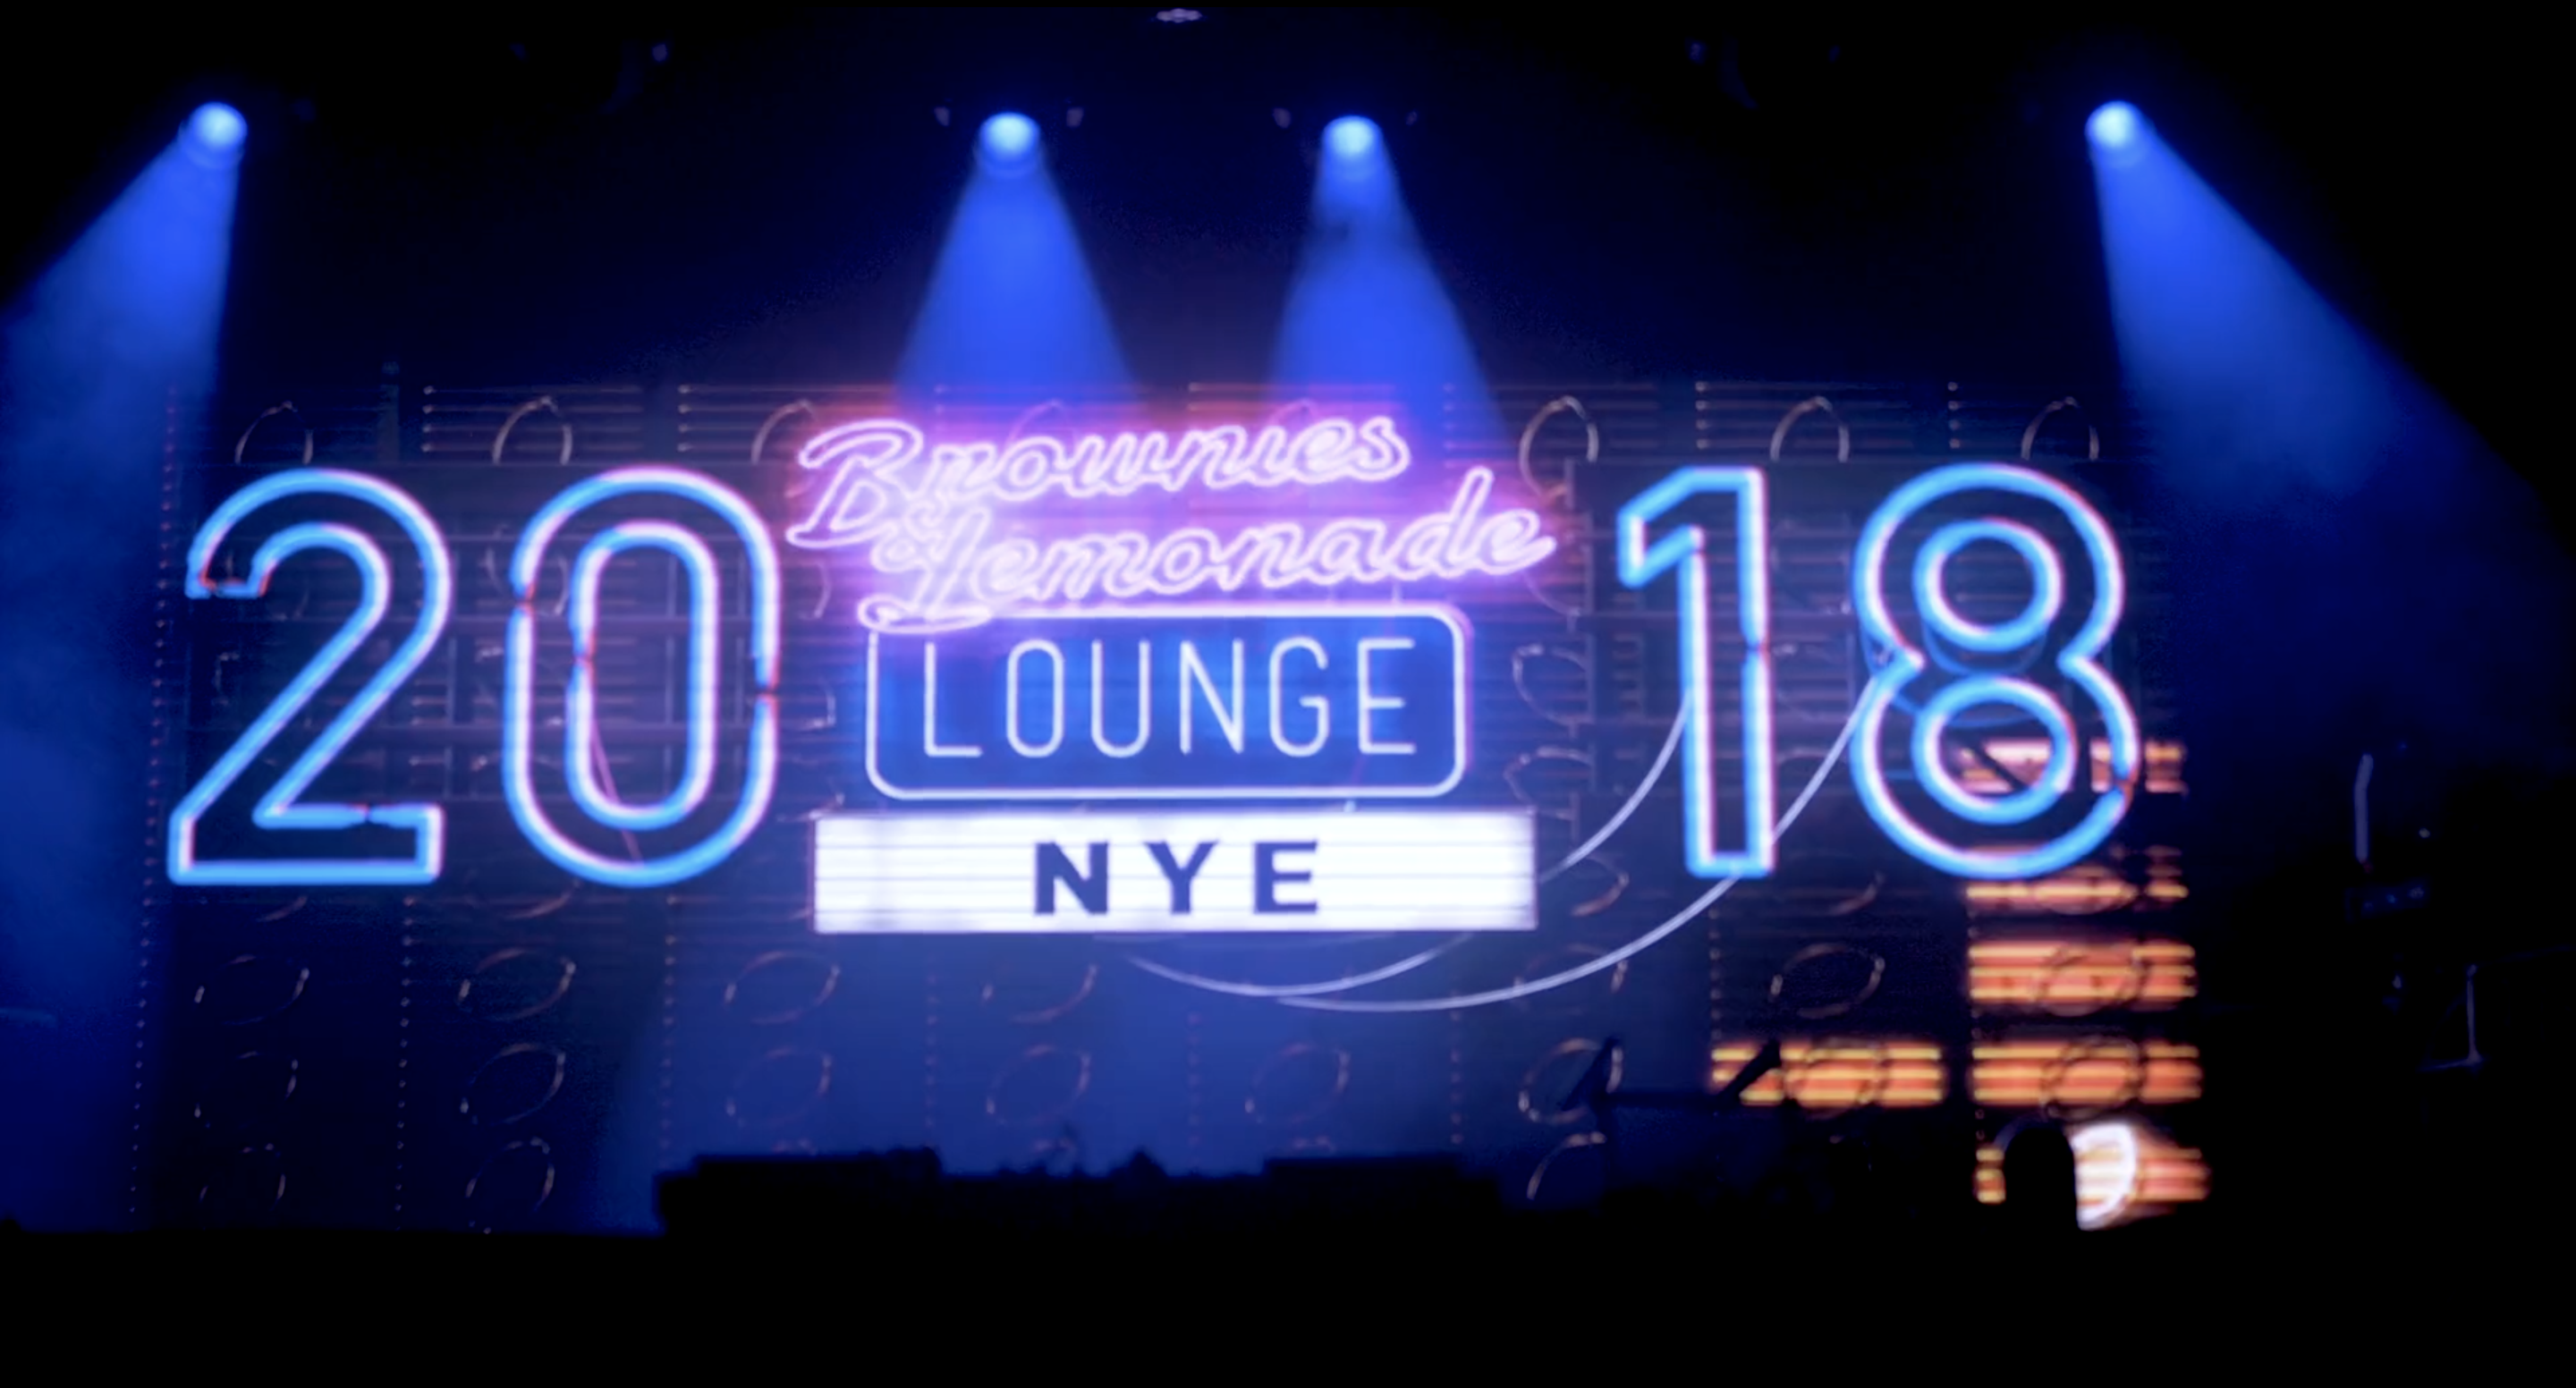 Brownies & Lemonade New Years Eve Party Promotional Mini-Documentary